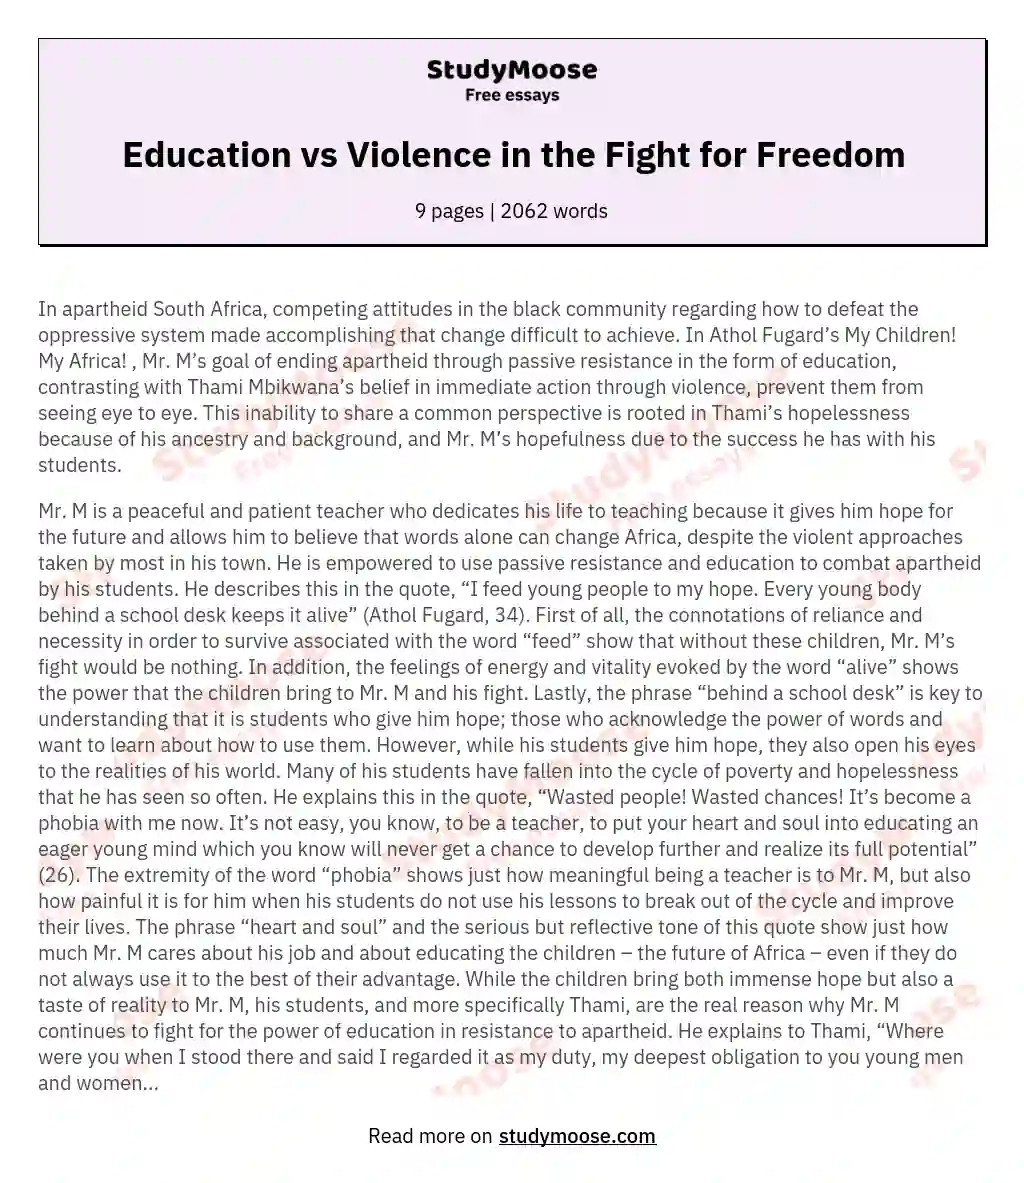 Education vs Violence in the Fight for Freedom essay